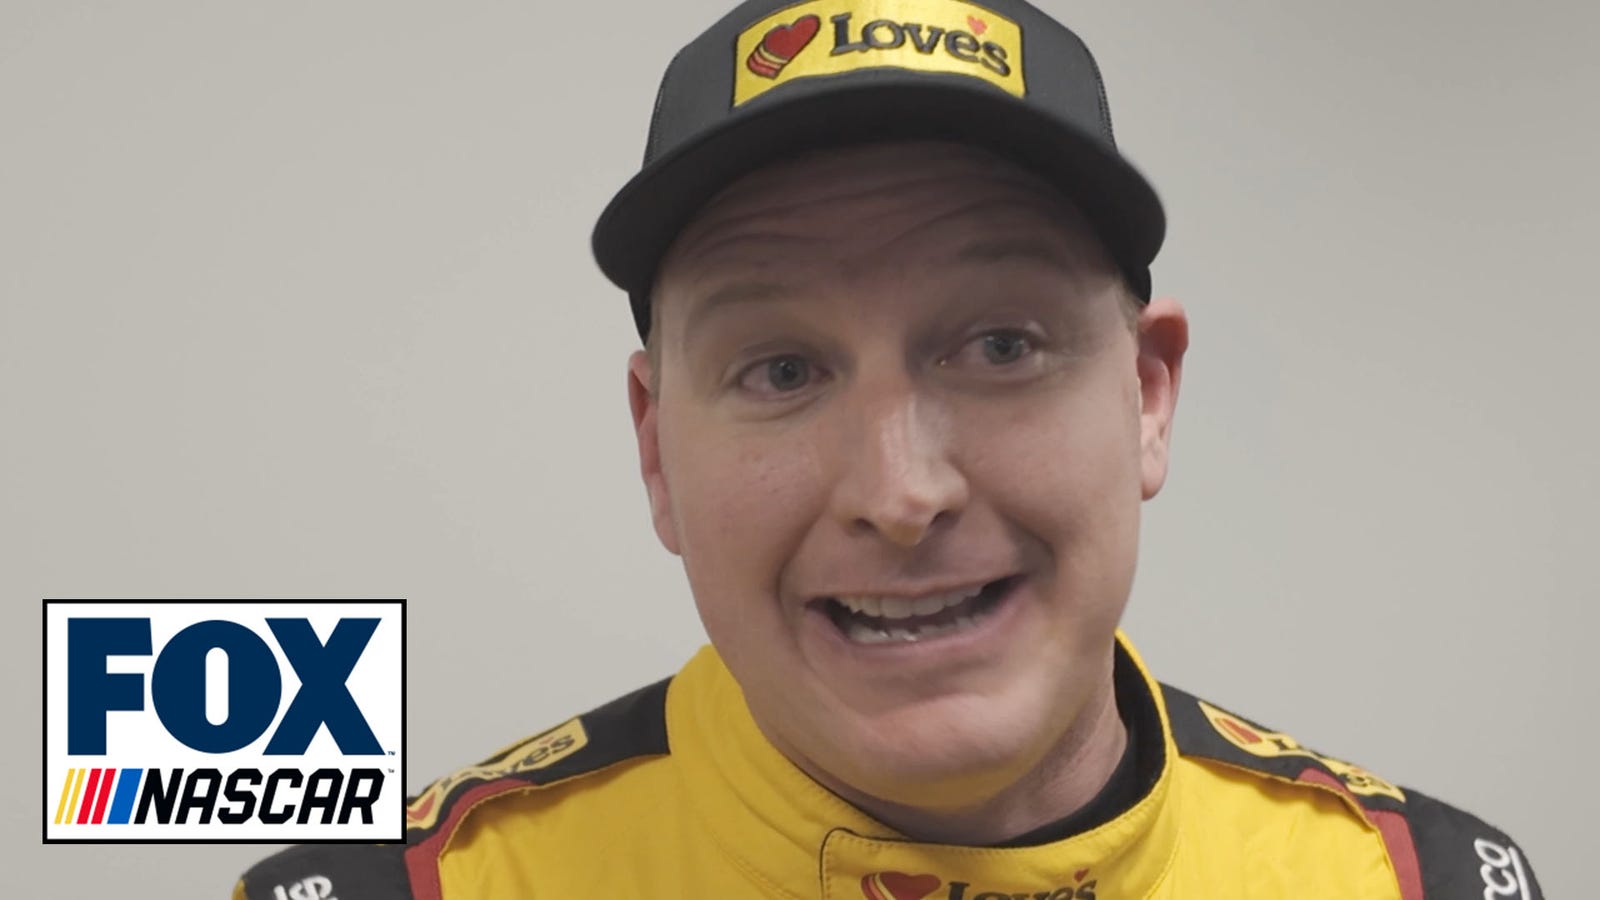 Michael McDowell on whether he wants NASCAR to add horsepower 